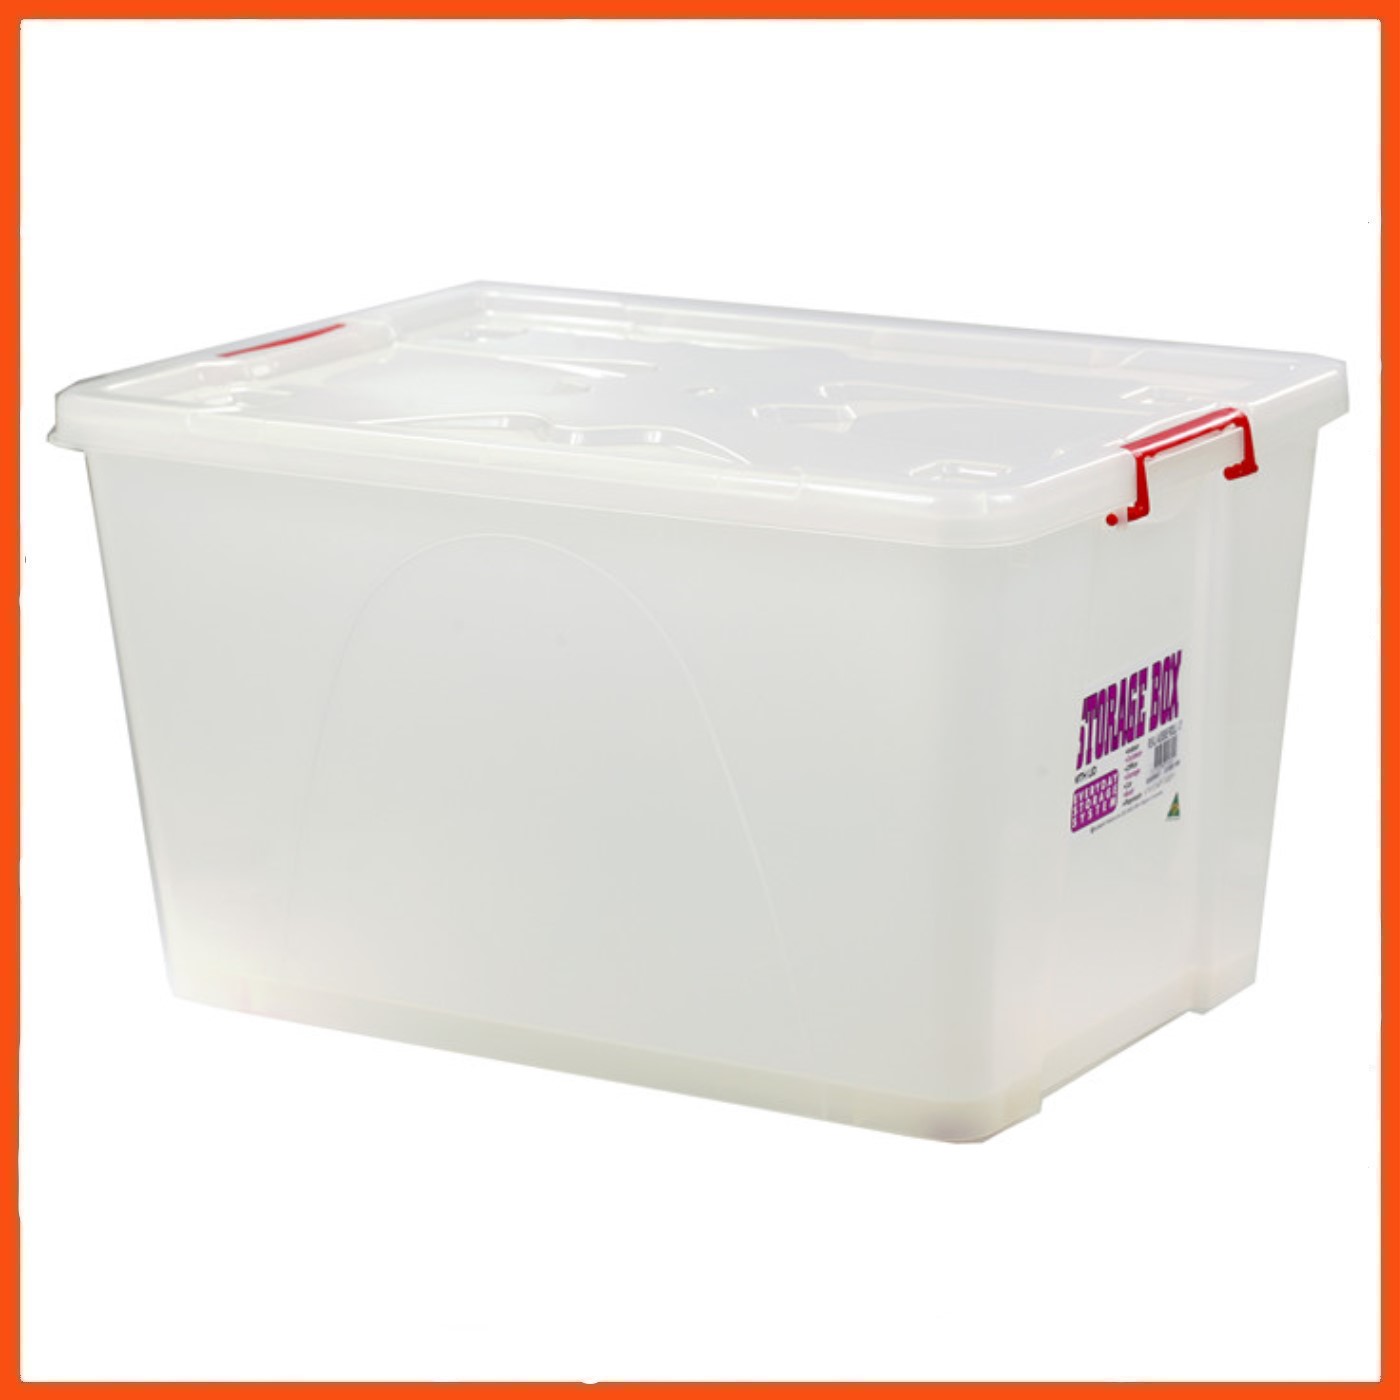 10 X Plastic Storage Containers 50l Australian Made Home Storage Boxes With Lids Ebay